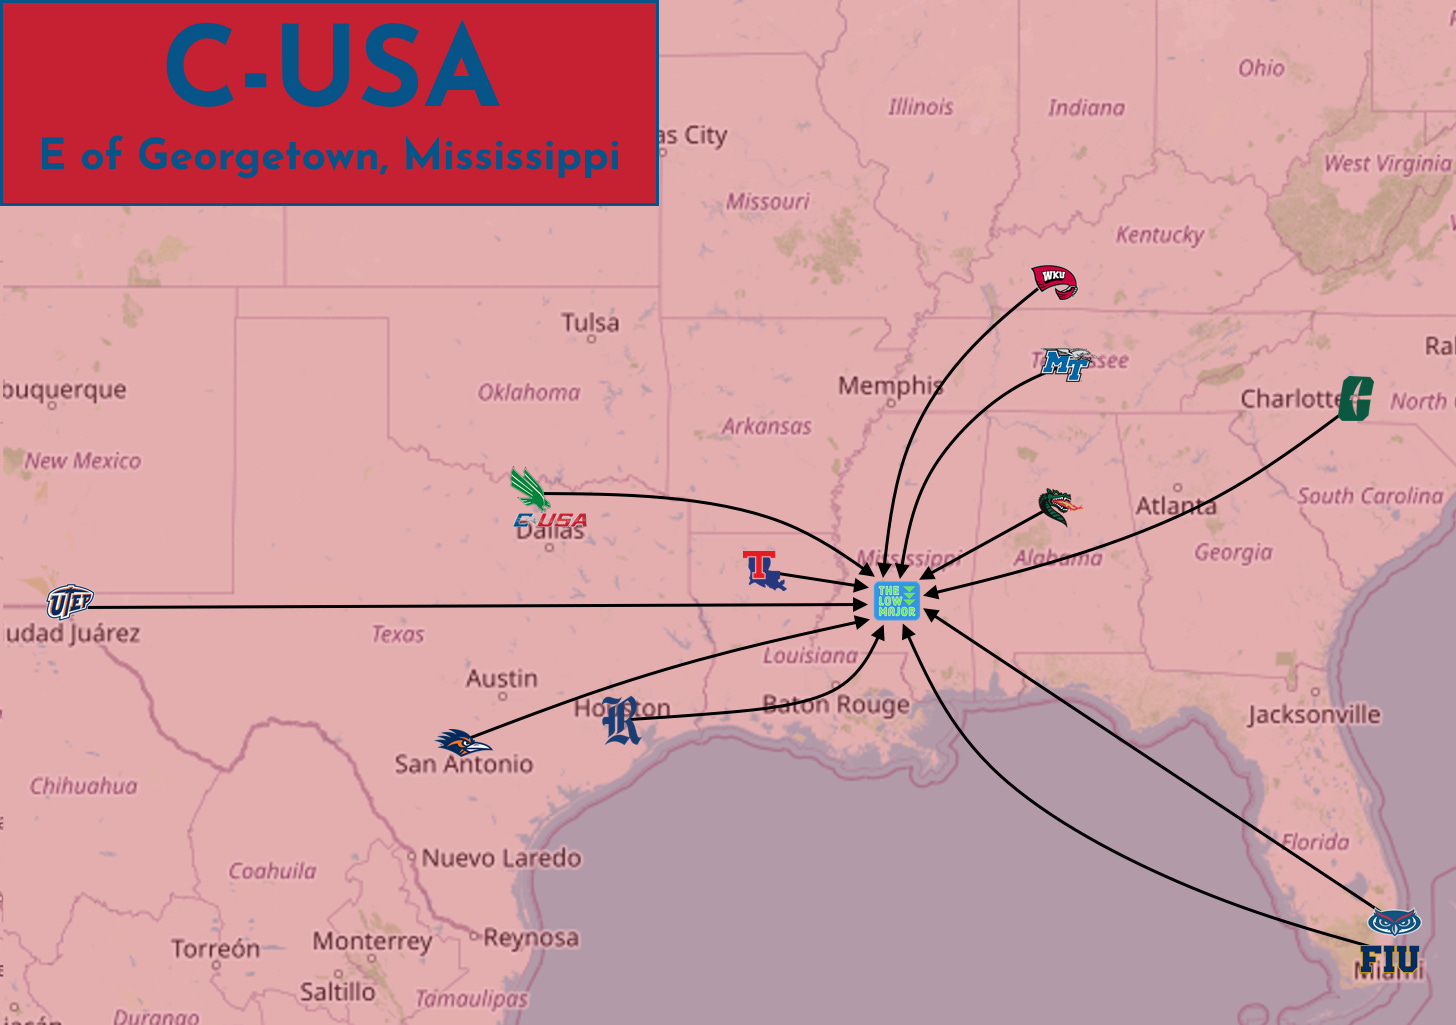 C-USA midpoint map